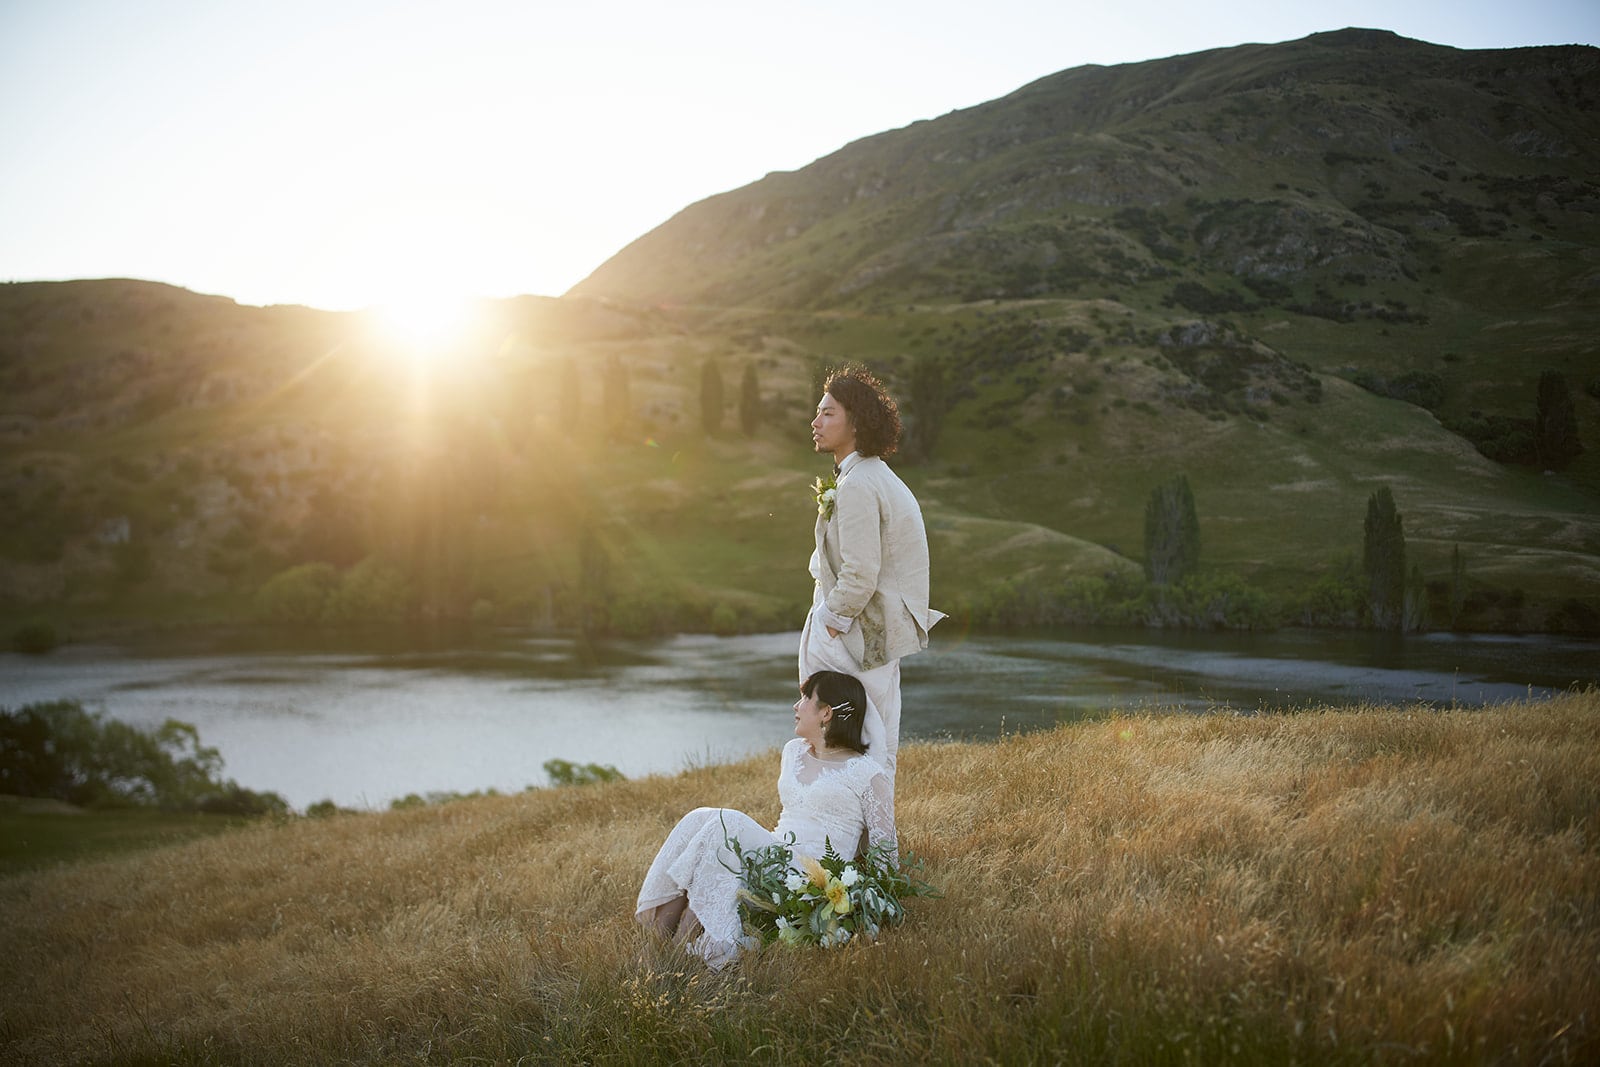 Queenstown Elopement Heli Wedding Photographer クイーンズタウン結婚式 | Eriko & Naoki, a bride and groom, having their Pre-Wedding Shoot in a grassy field at sunset with the stunning backdrop of Queenstown Heli.